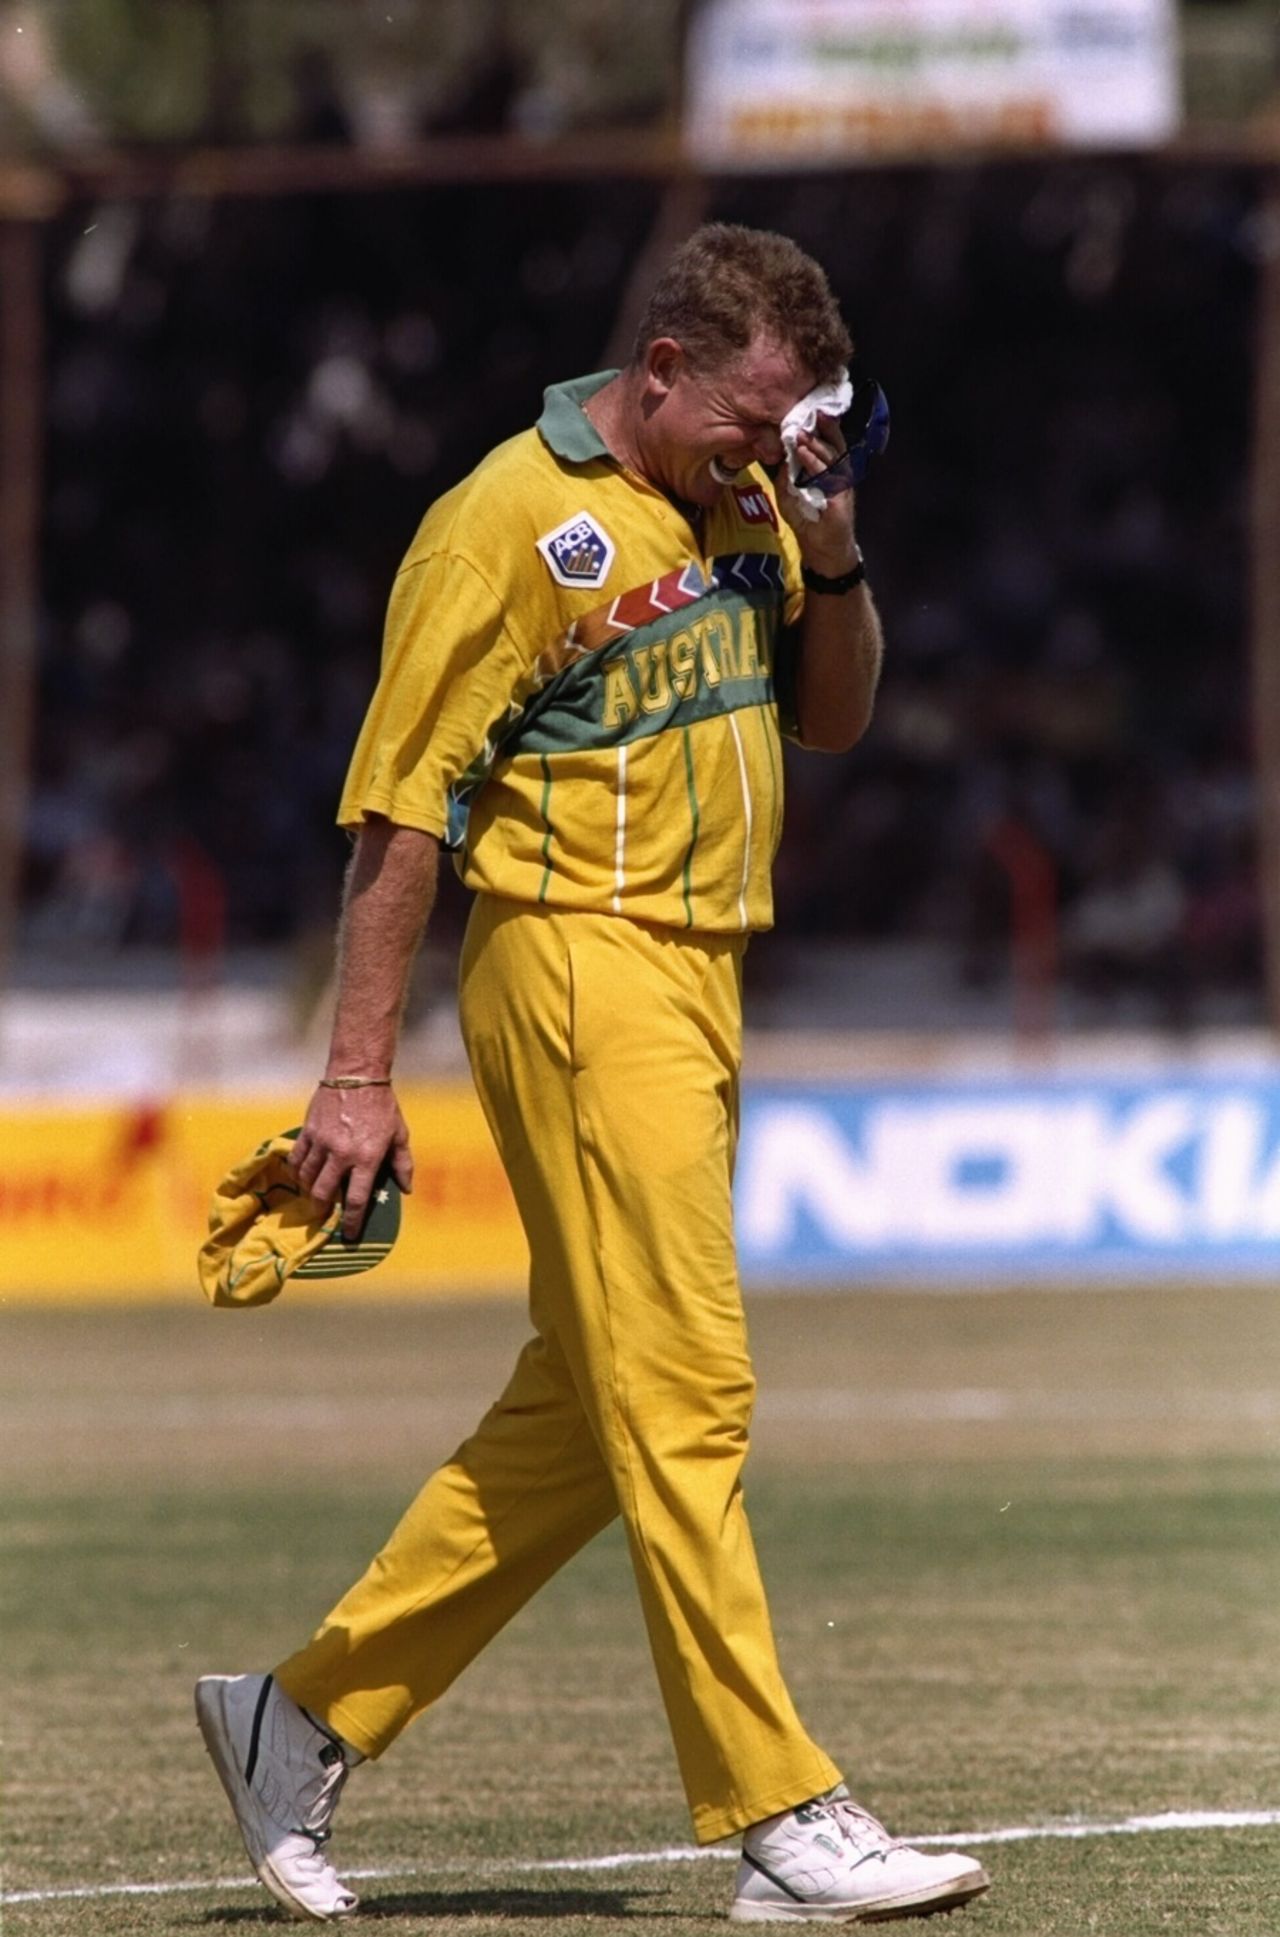 Craig McDermott exits international cricket after suffering a calf injury against Kenya in the 1996 World Cup, at Vizag, February 23, 1996.